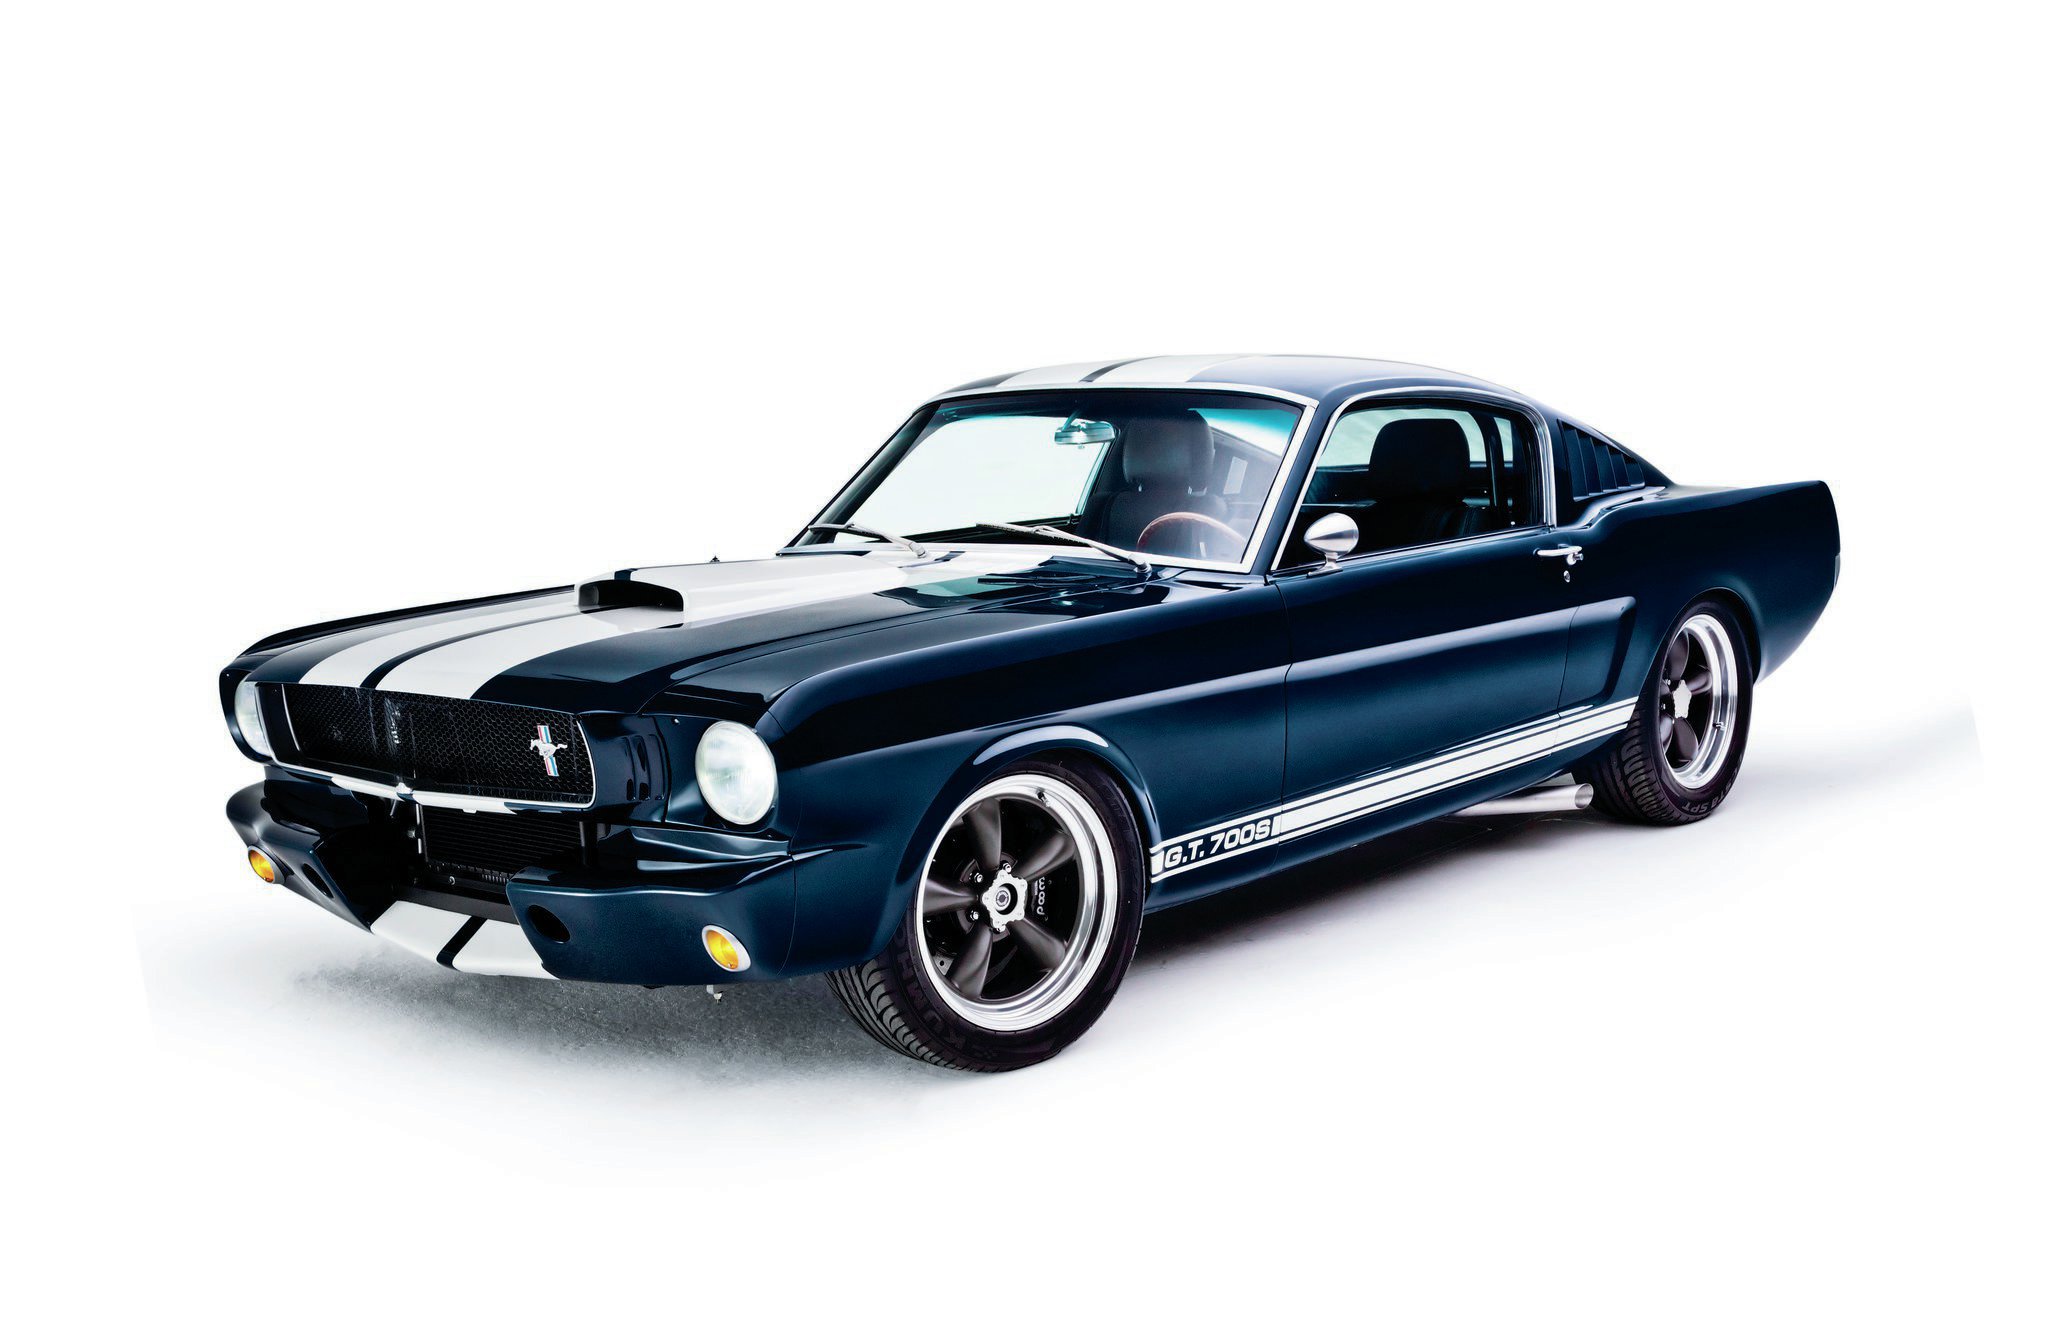 Amazing 1965 Mustang Fastback Pictures & Backgrounds